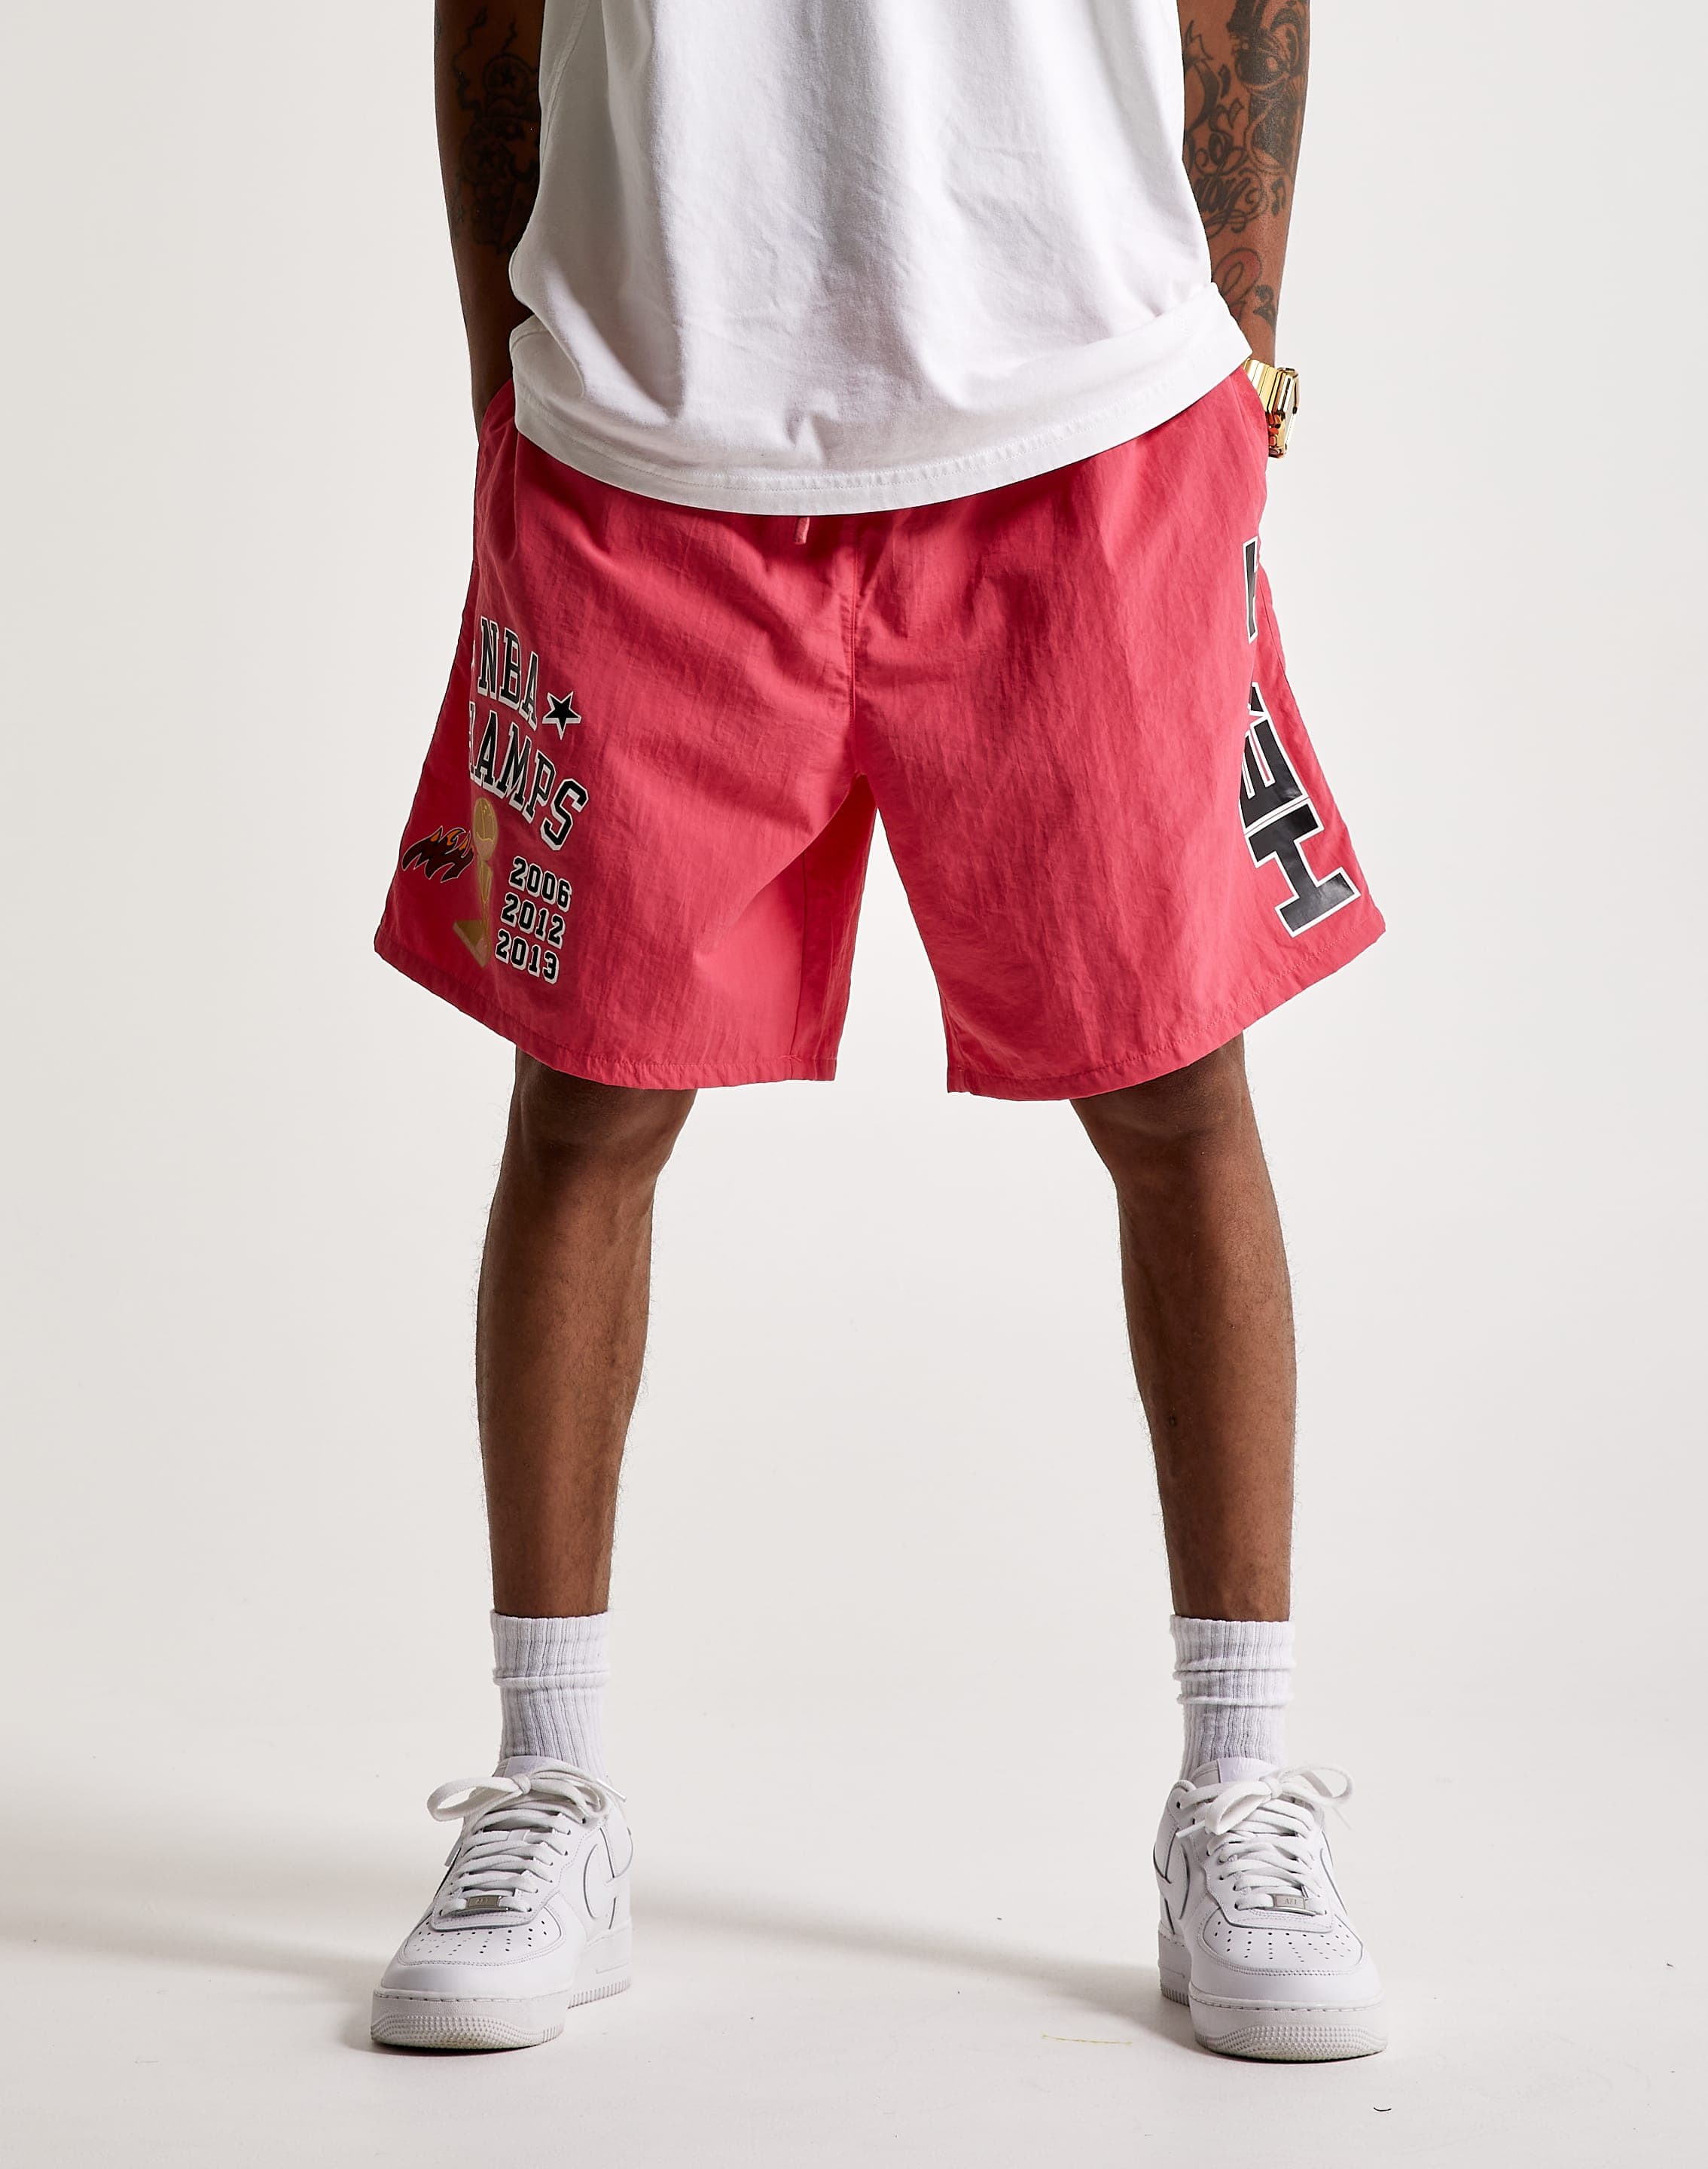 Miami Heat Pink Throwback Shorts in 2023  Miami heat, Fitness wear  outfits, Vintage shorts